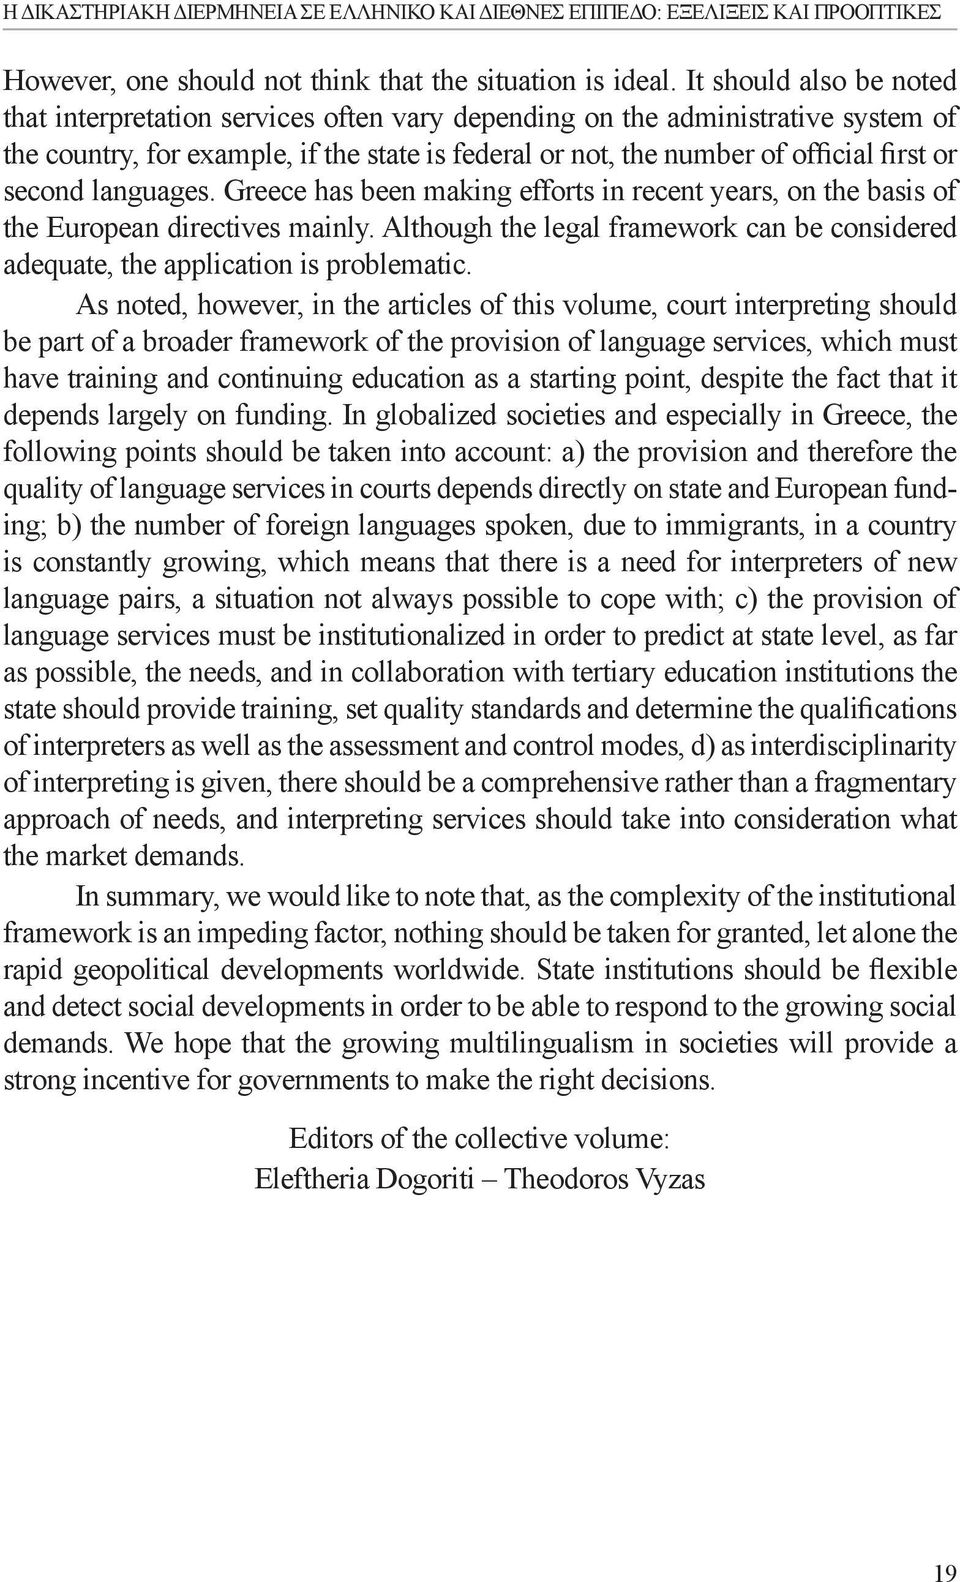 second languages. Greece has been making efforts in recent years, on the basis of the European directives mainly.